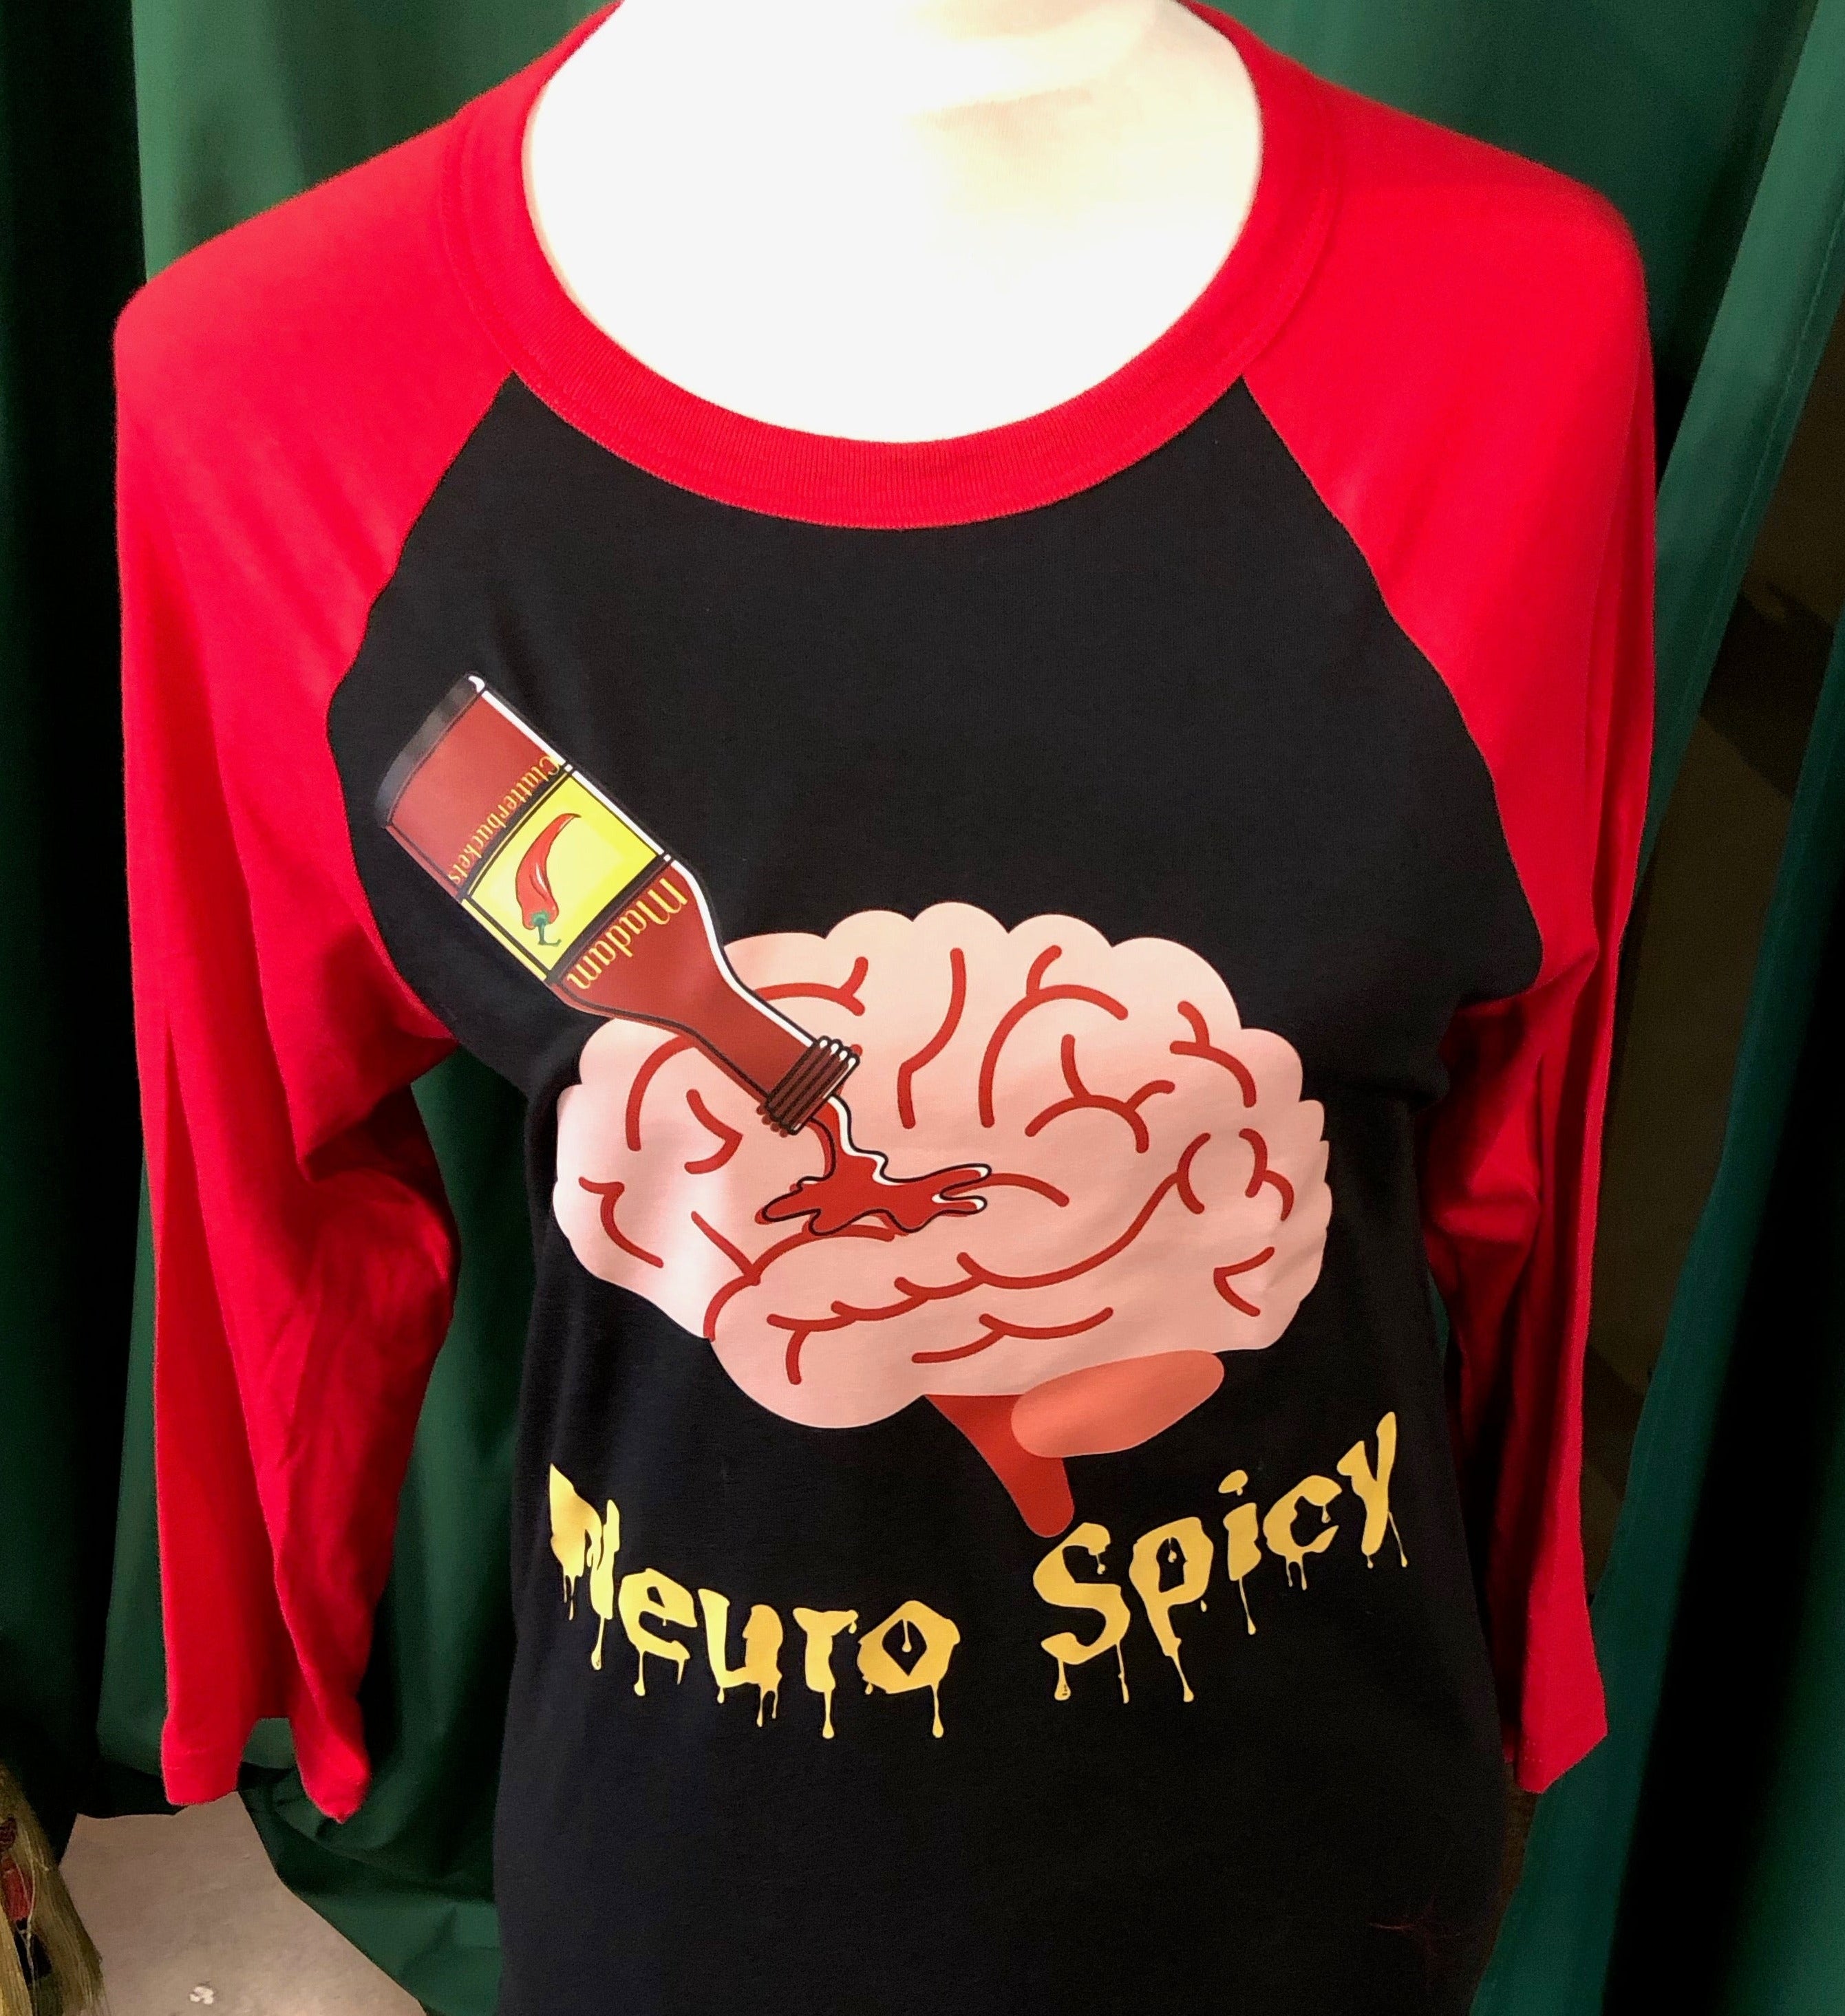 Neuro Spicy Full Color Logo Baseball Tee by Madam Clutterbucket's!